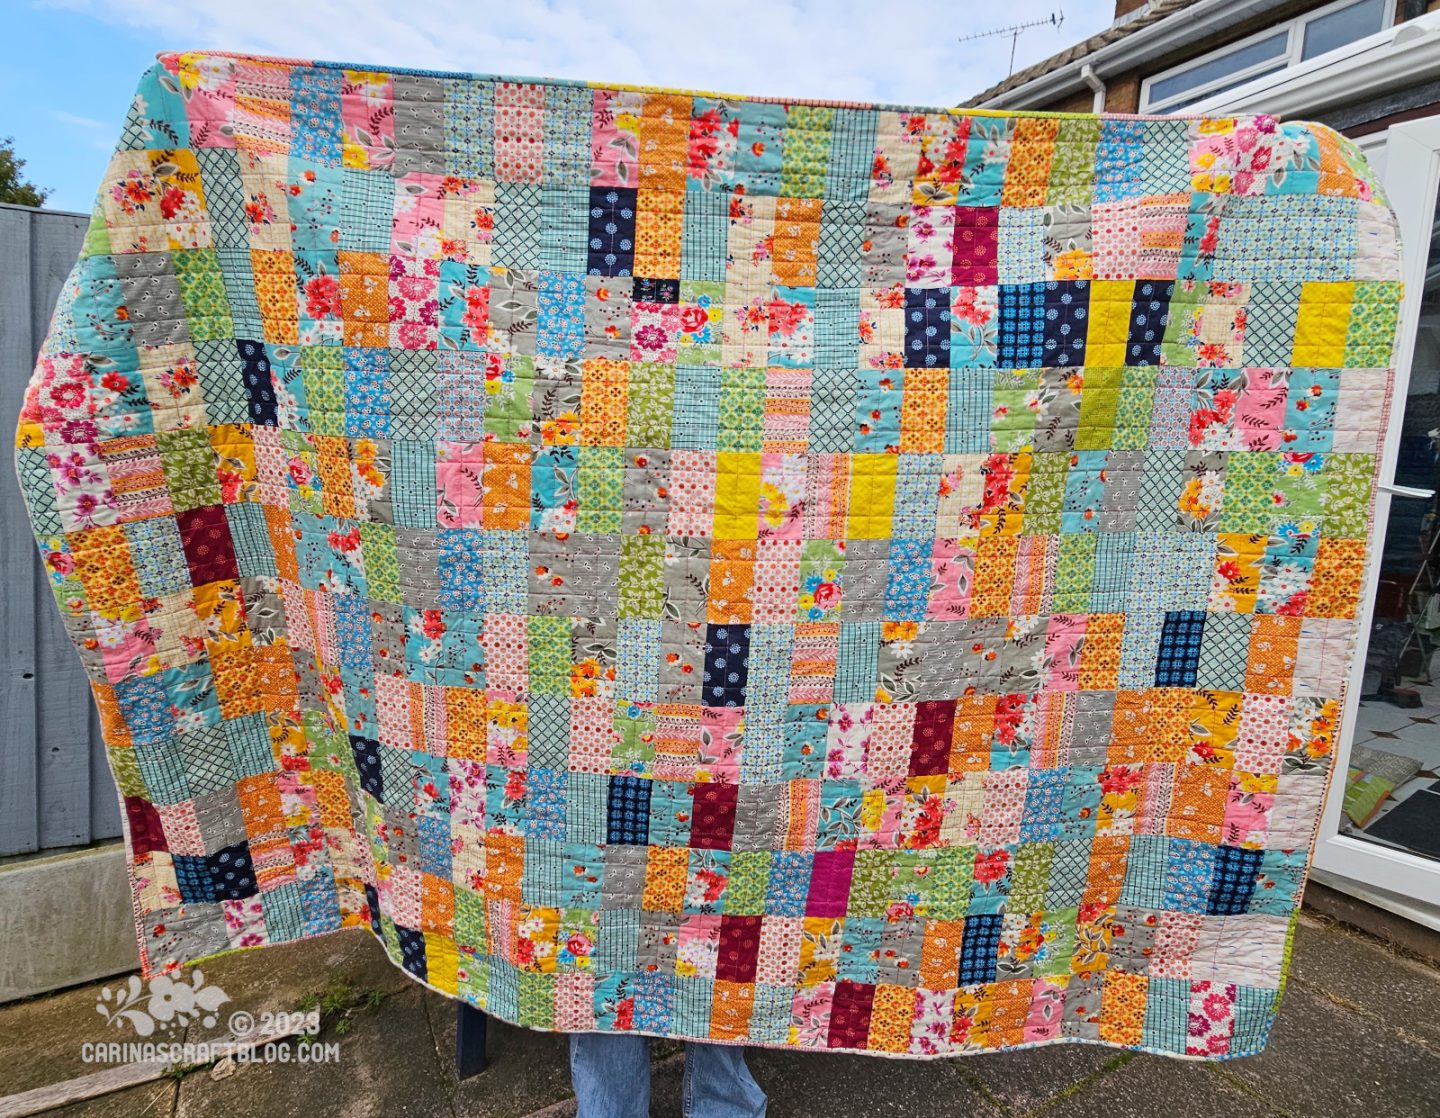 A quilt is held up horizontally by a person standing on a patio with a blue fence behind them. The quilt front is made up of multi colour rectangles. 